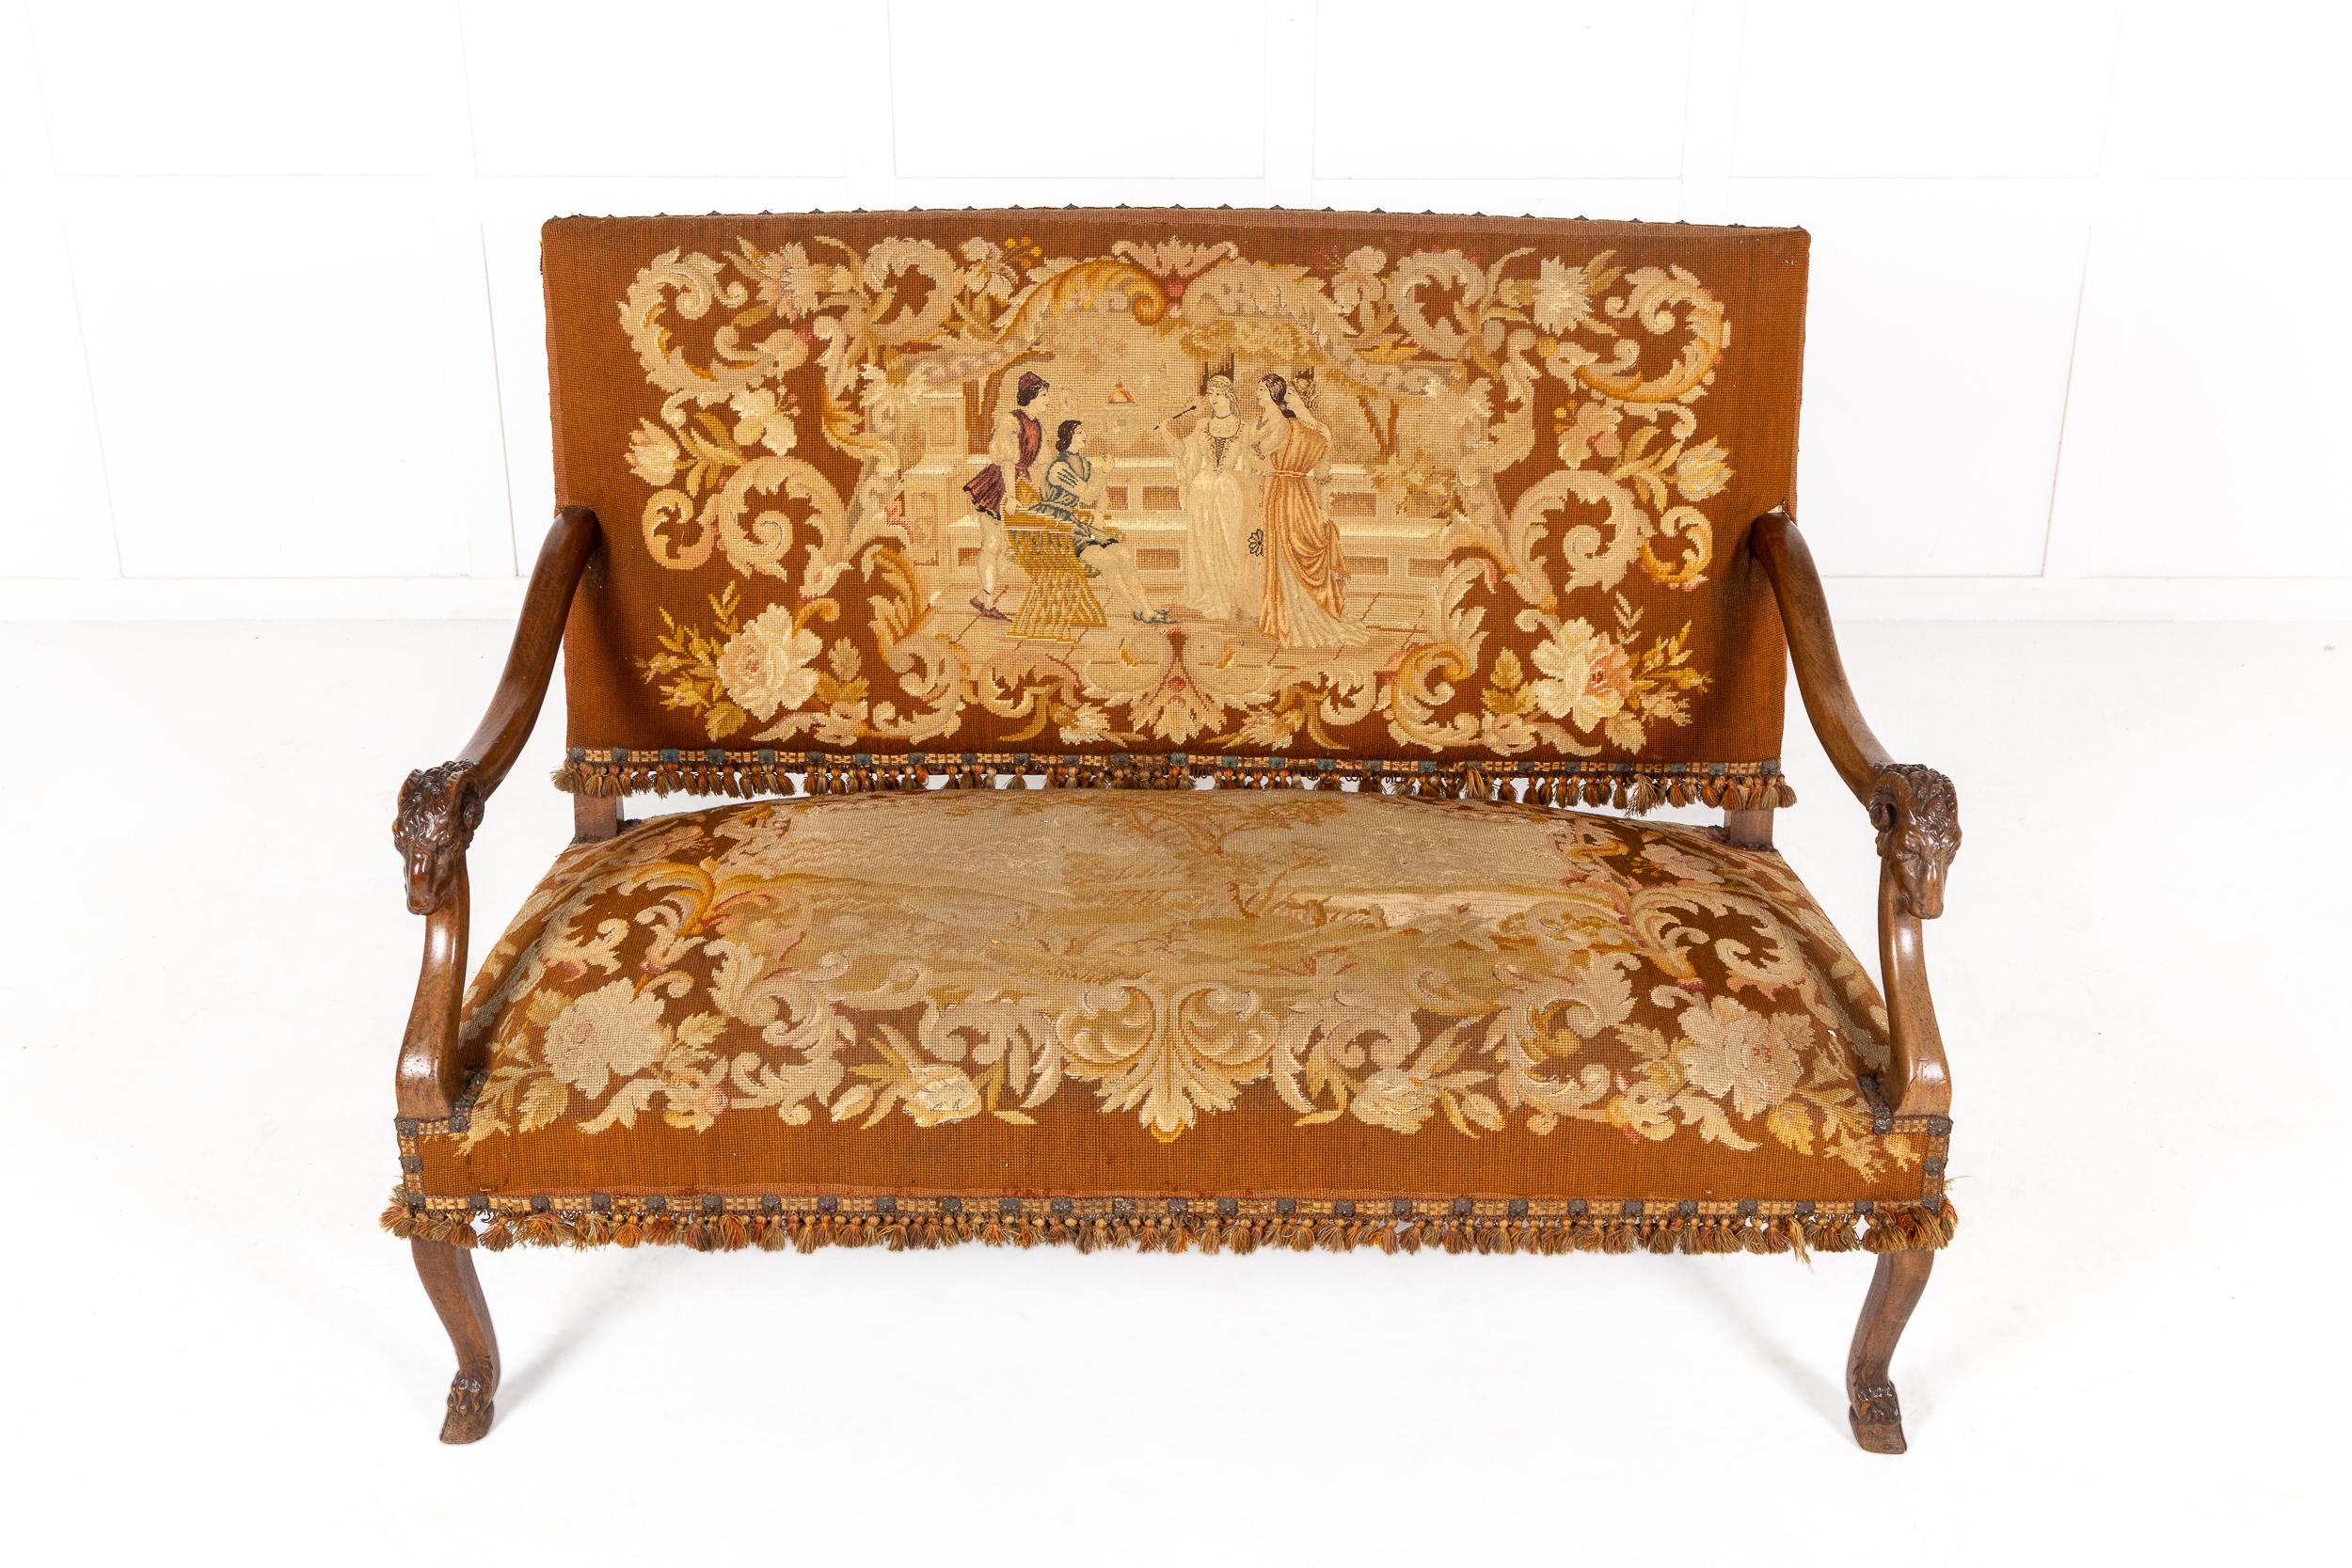 A bright and colourful 19th century French walnut sofa of good classic design with fabulous decorative needlepoint tapestry fabric depicting five characters in conversation. Having a generous padded seat with similar designs and braided tassels